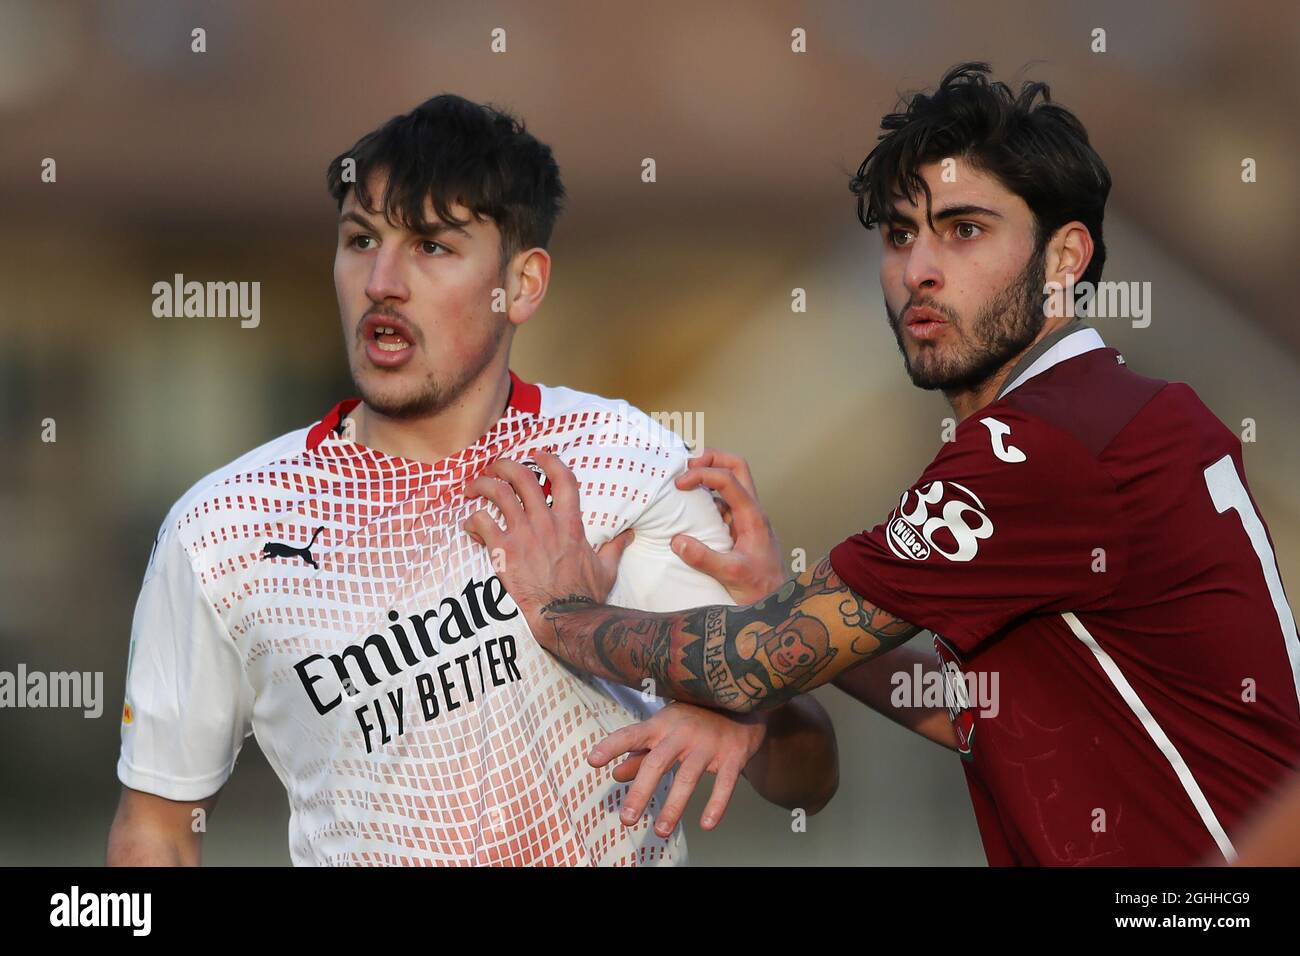 Denis Portanova of Torino FC Gets to grips with Riccardo Tonin of AC Milan  during the Primavera 1 match at Stadio Comunale di Volpiano, Volpiano.  Picture date: 27th January 2021. Picture credit